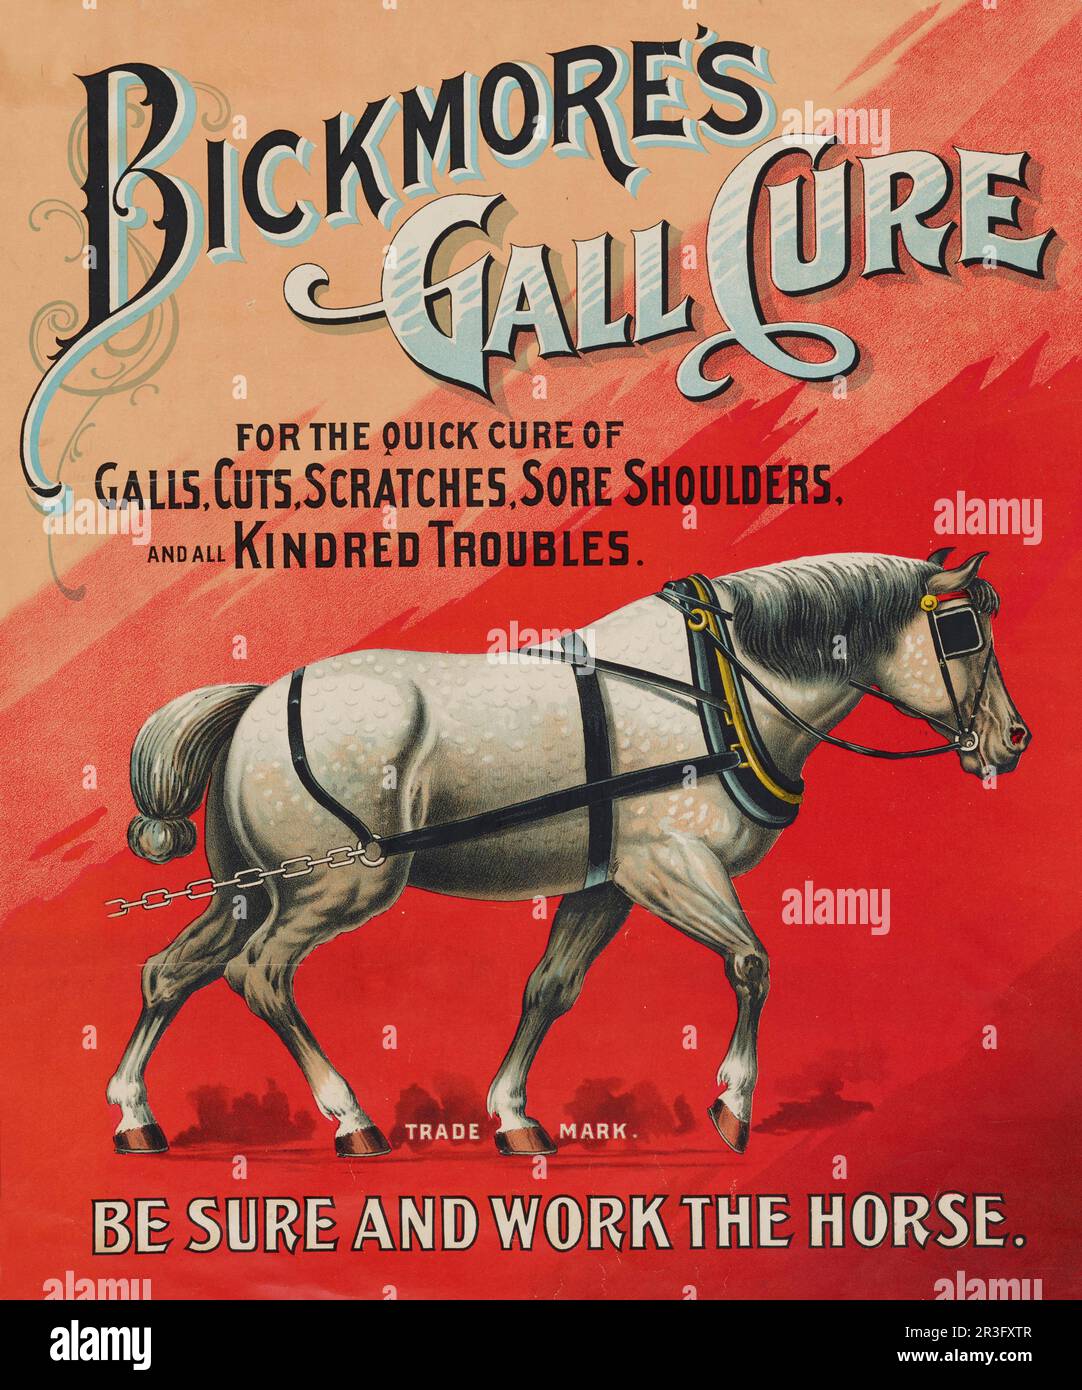 Vintage advertisement for Bickmore's gall cure for horses. Stock Photo